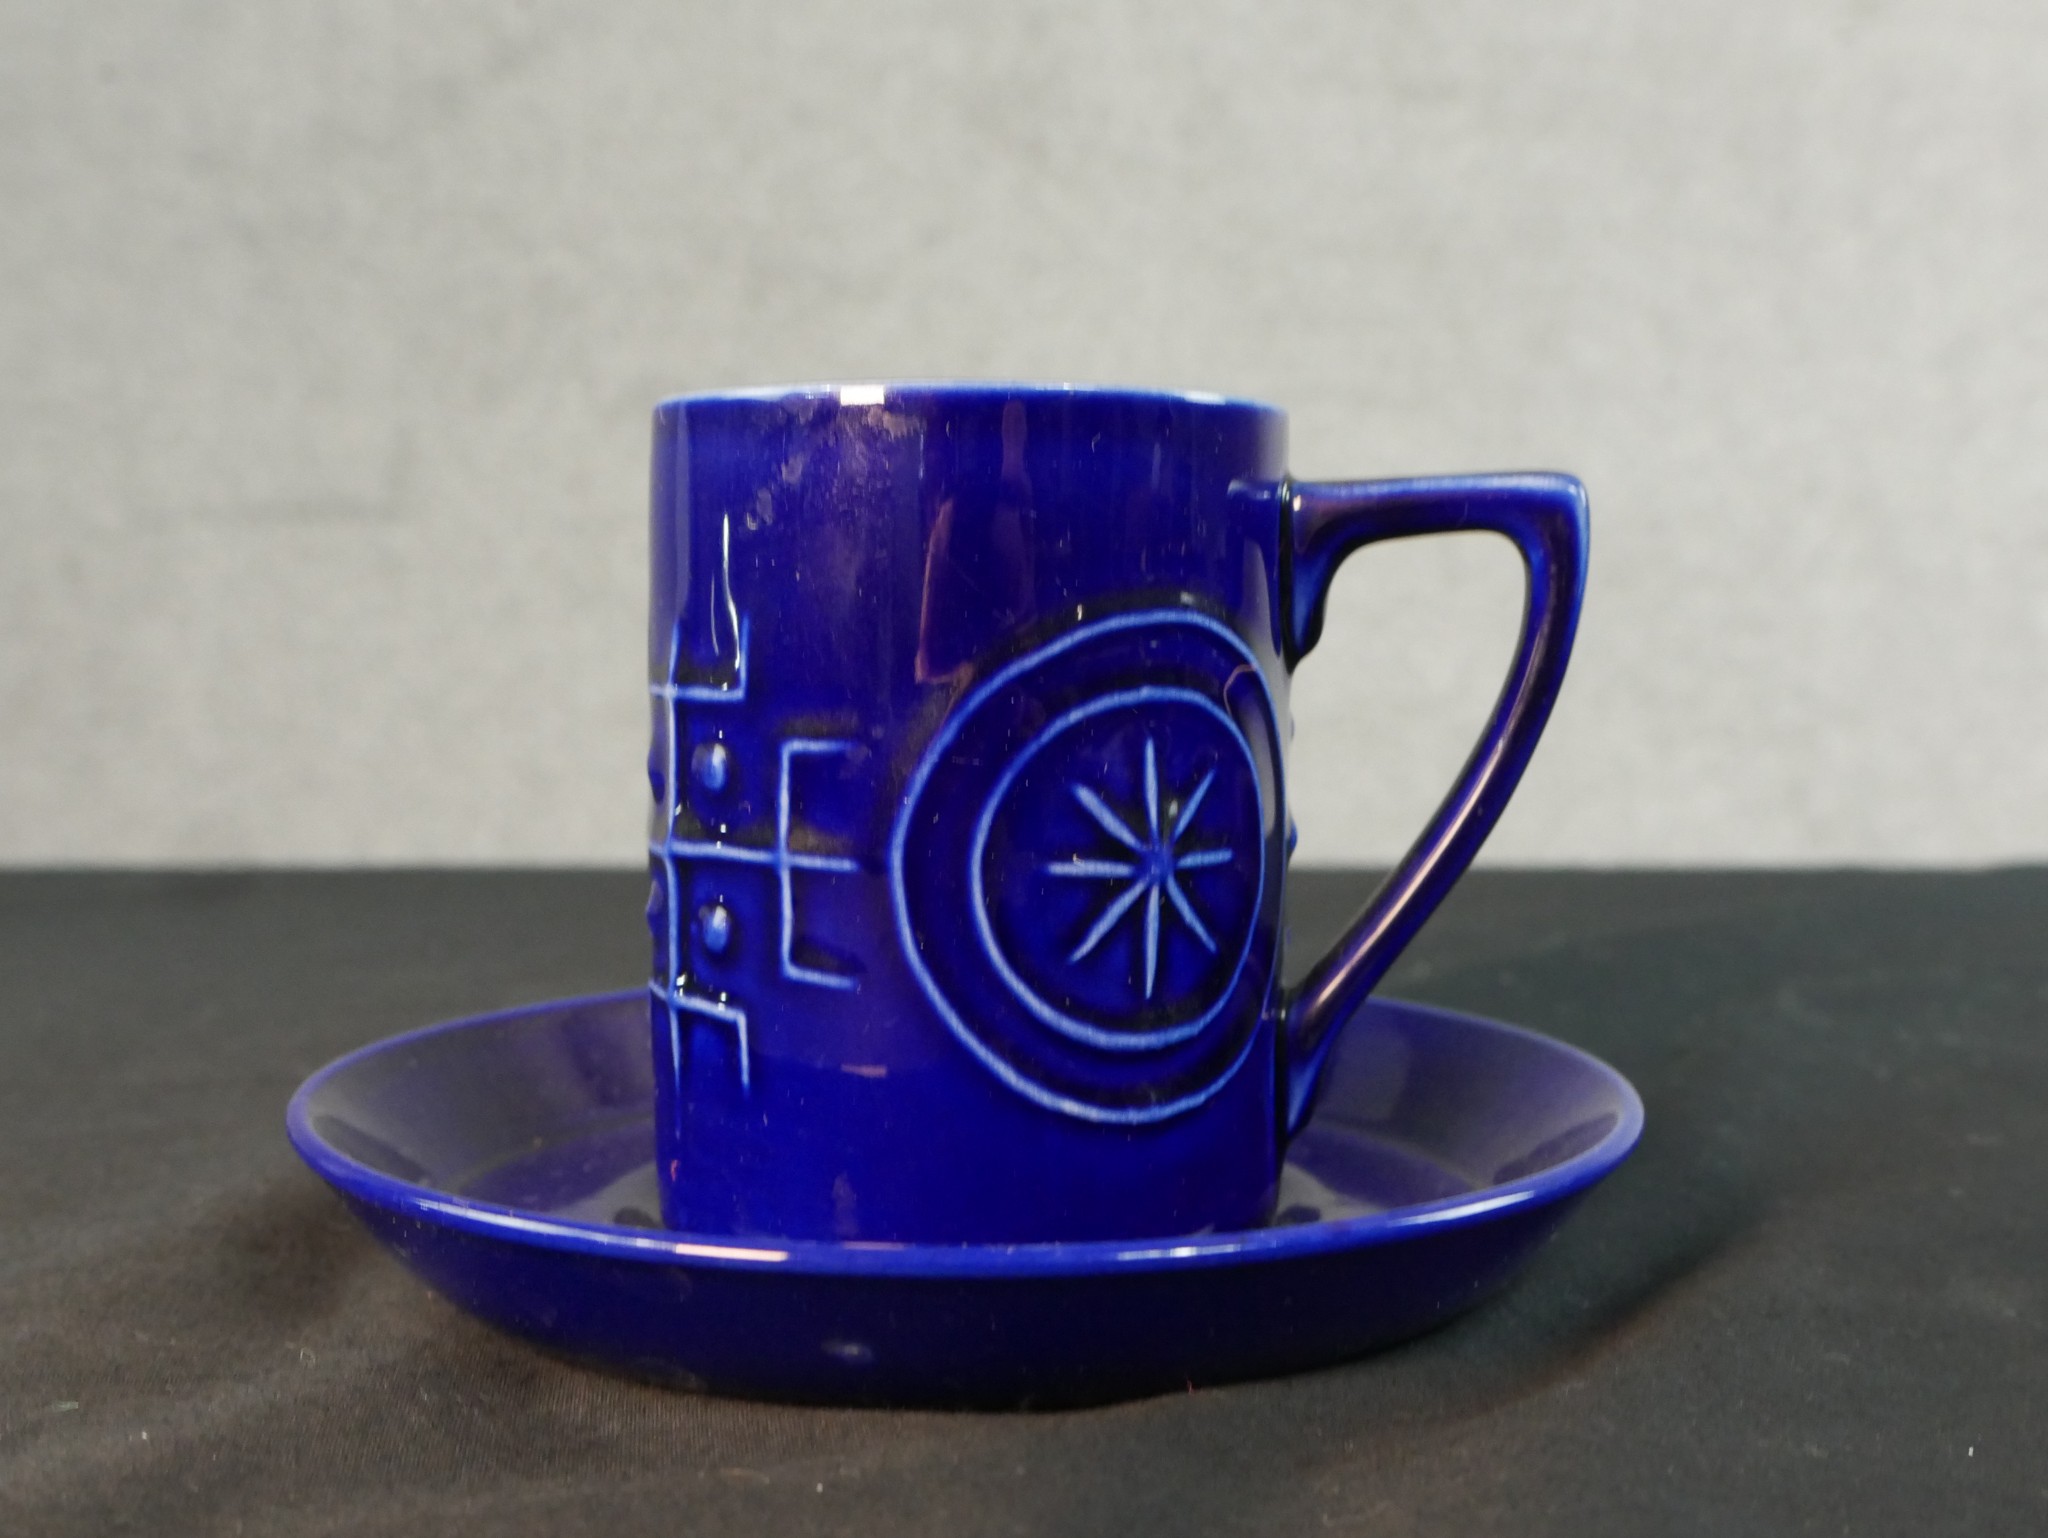 Susan Williams-Ellis for Portmeirion, a Totem pattern coffee set in a cobalt blue glaze, to seat - Image 6 of 6